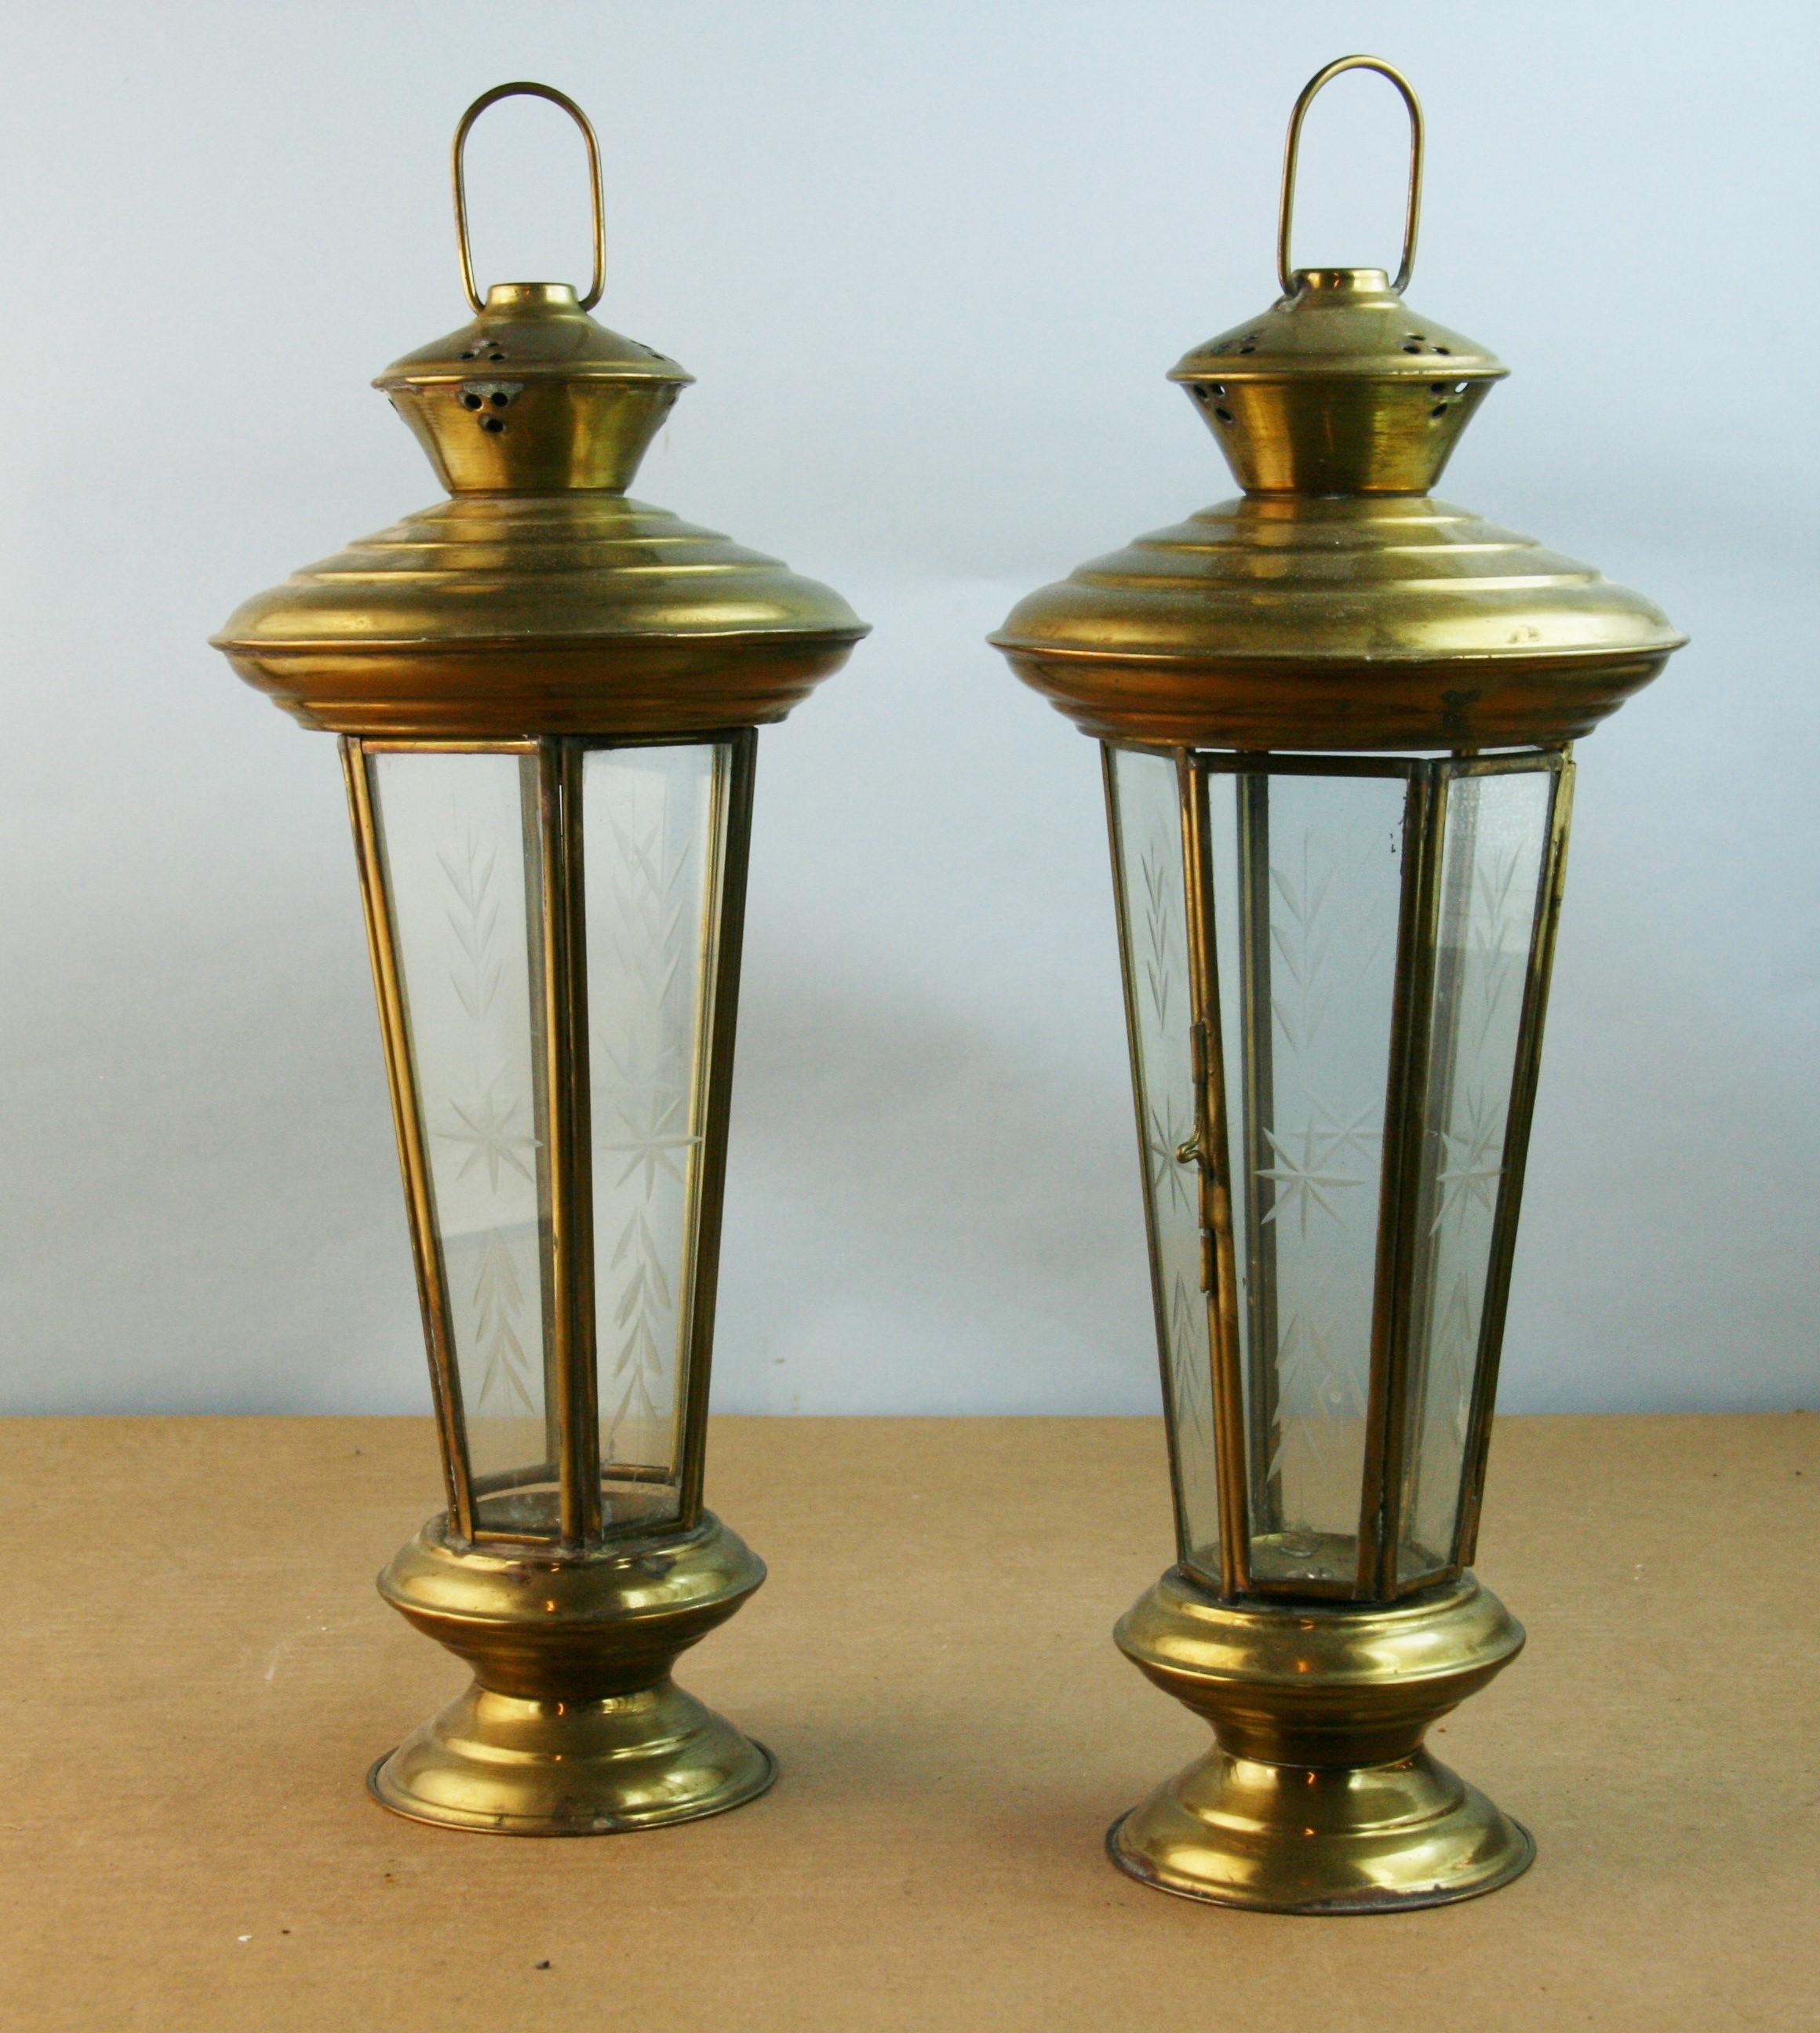 Pair American made solid brass and cut glass garden candle lanterns.
Supplied with 2 feet brass antique chain.